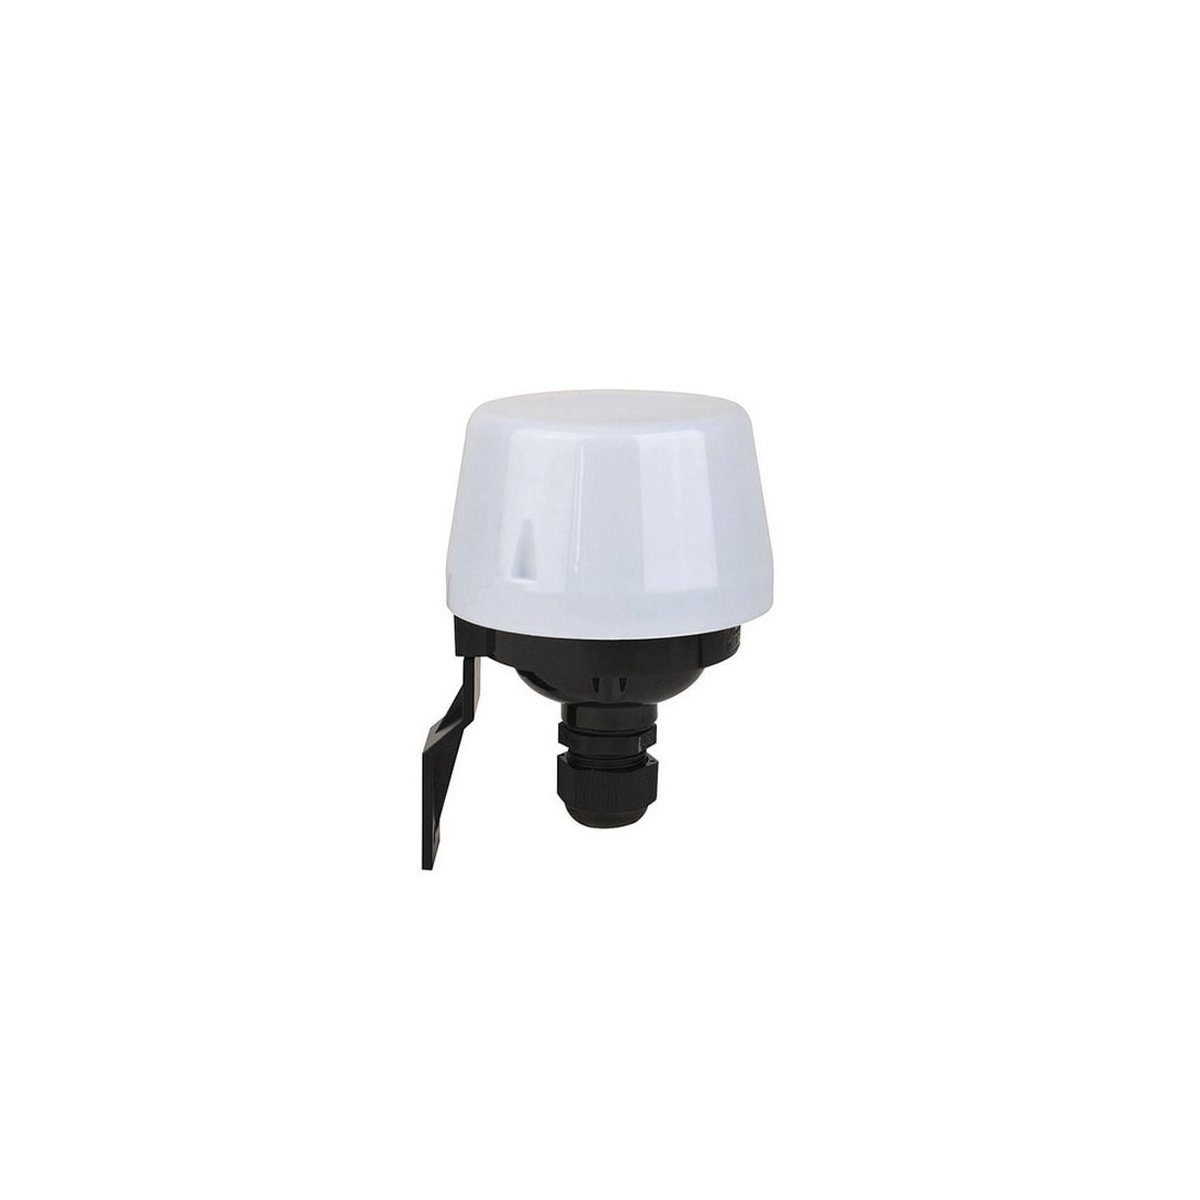 Outdoor Lamps Connection Material Light sensitive switch lamp built on - 230V